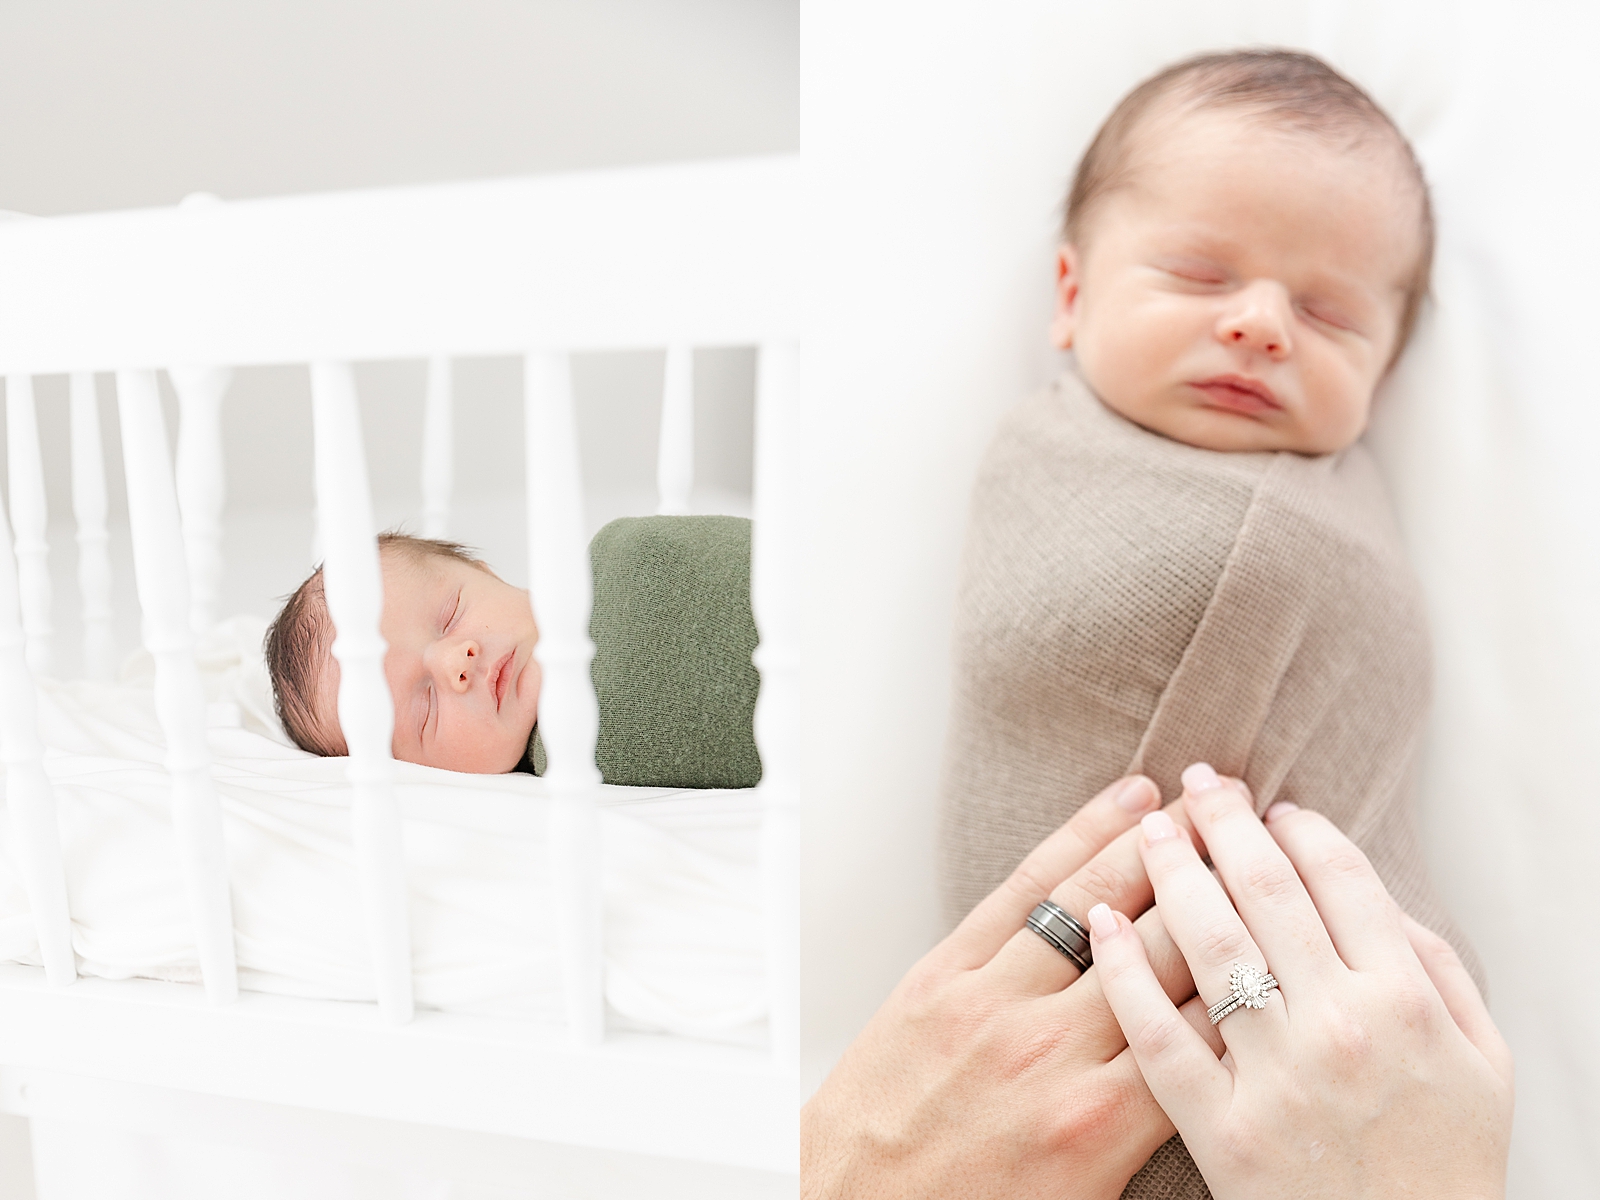 baby in green swaddle smiling through the crib bars and baby swaddled in a tan swaddle with parents ring fingers as a close up